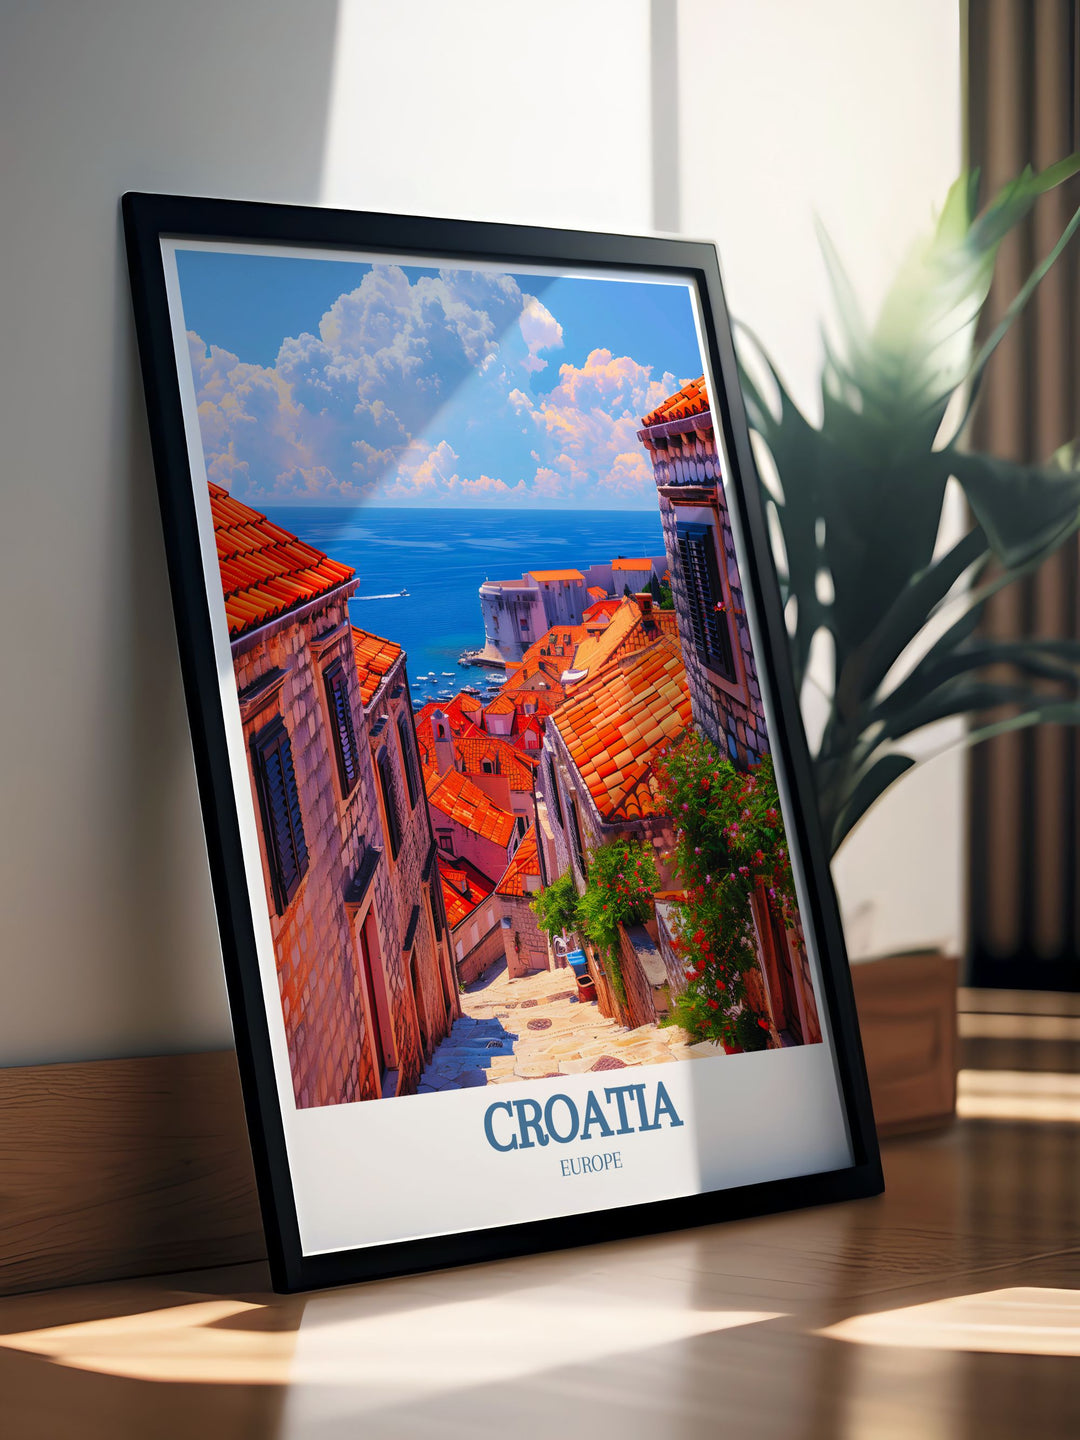 The combination of historic beauty in Split and the serene charm of the Adriatic Sea is beautifully captured in this vintage travel poster, making it a stunning addition to any wall art collection celebrating Mediterranean destinations.